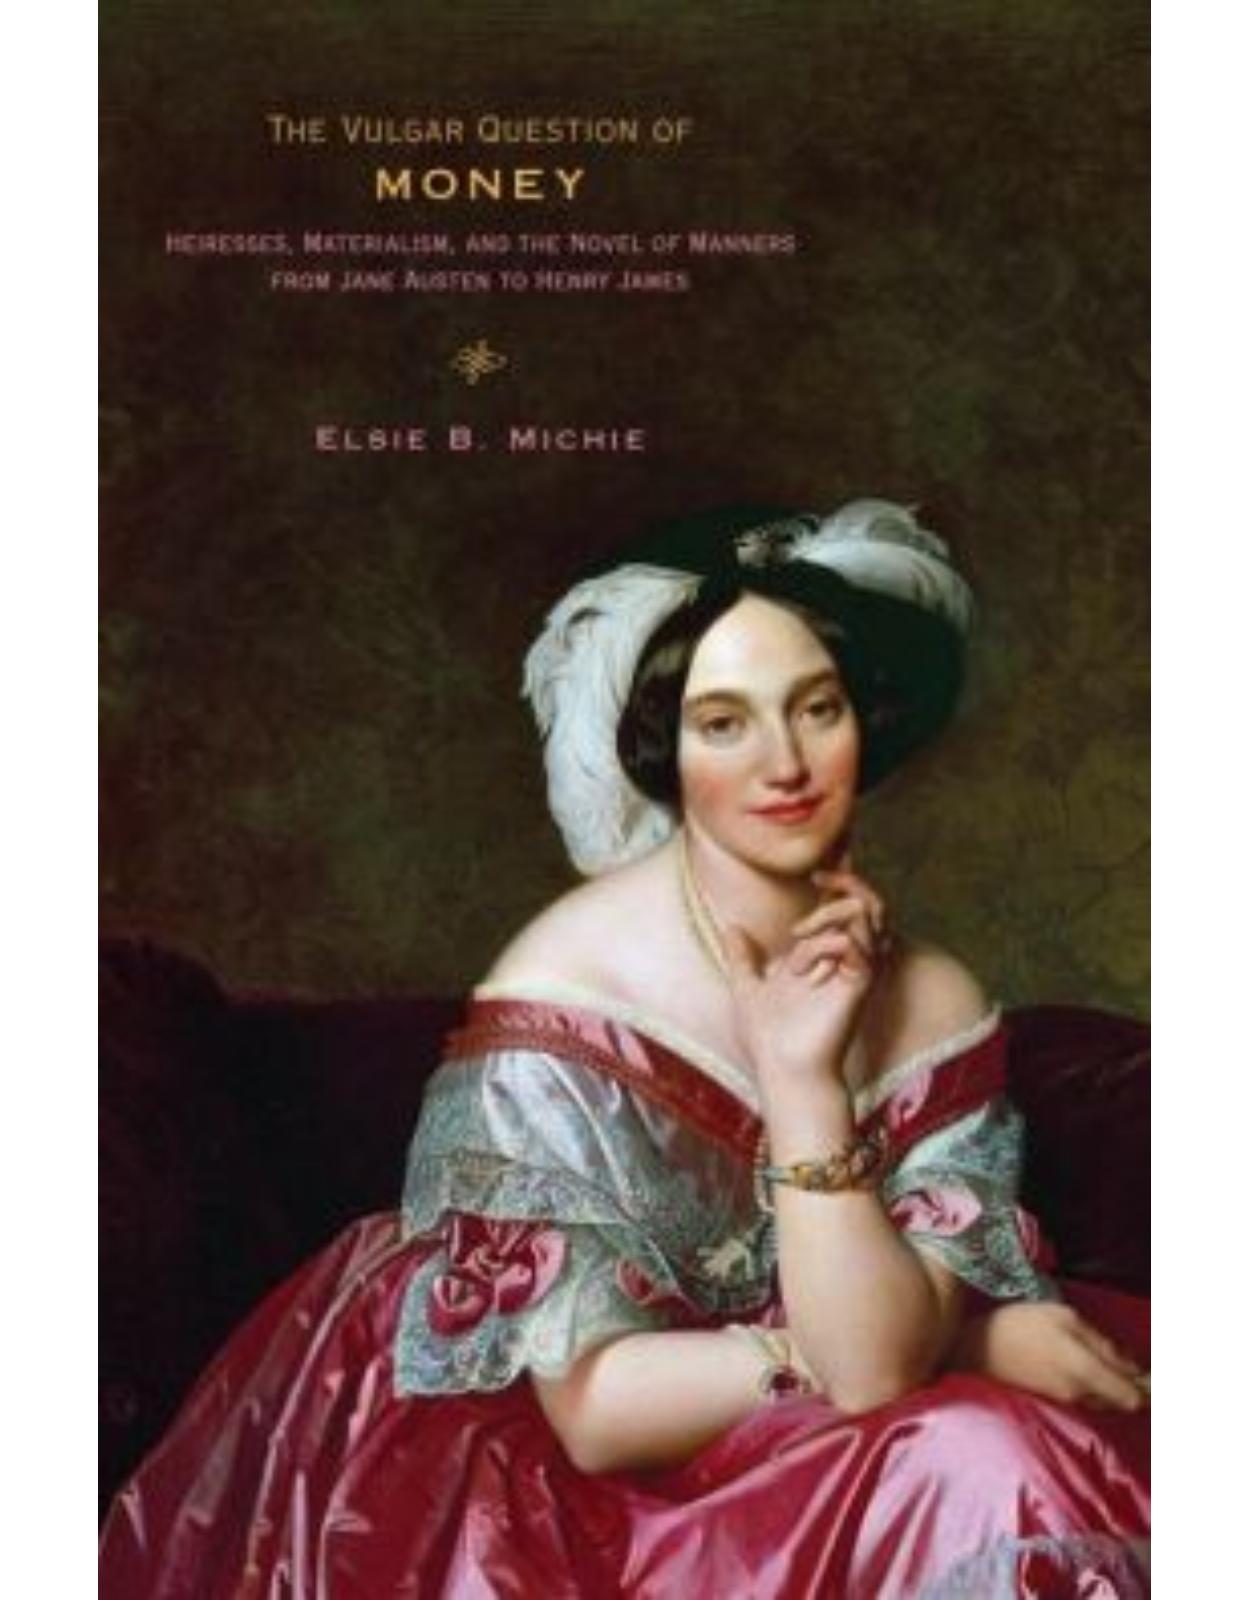 Vulgar Question of Money. Heiresses, Materialism, and the Novel of Manners from Jane Austen to Henry James